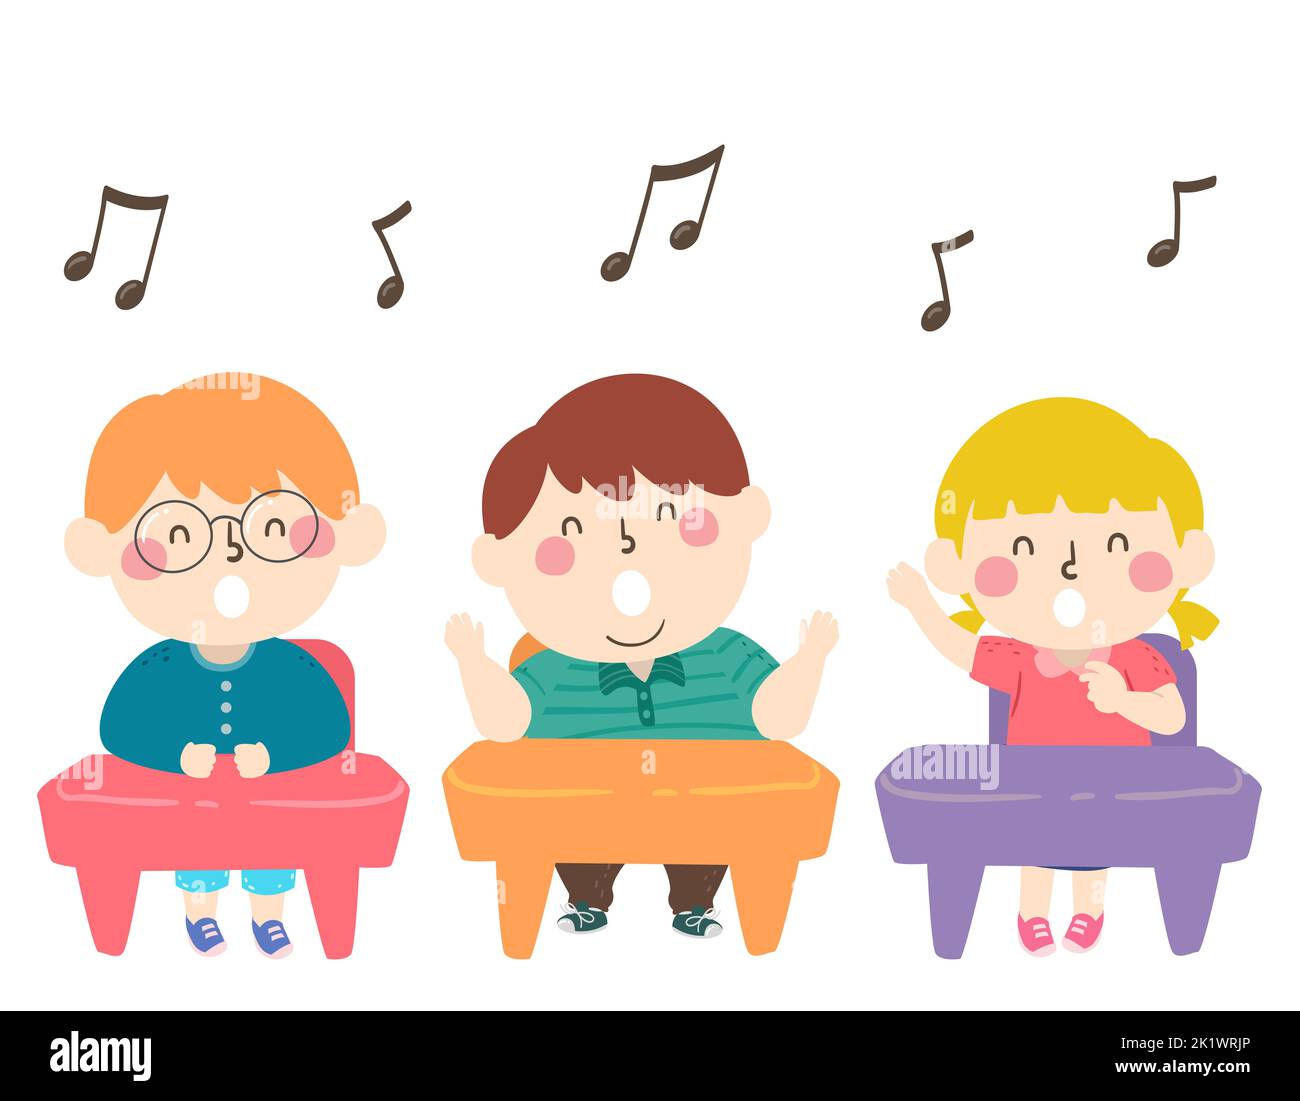 Illustration of Kids Sitting Down in Class and Singing a Song with Music Notes Above Stock Photo